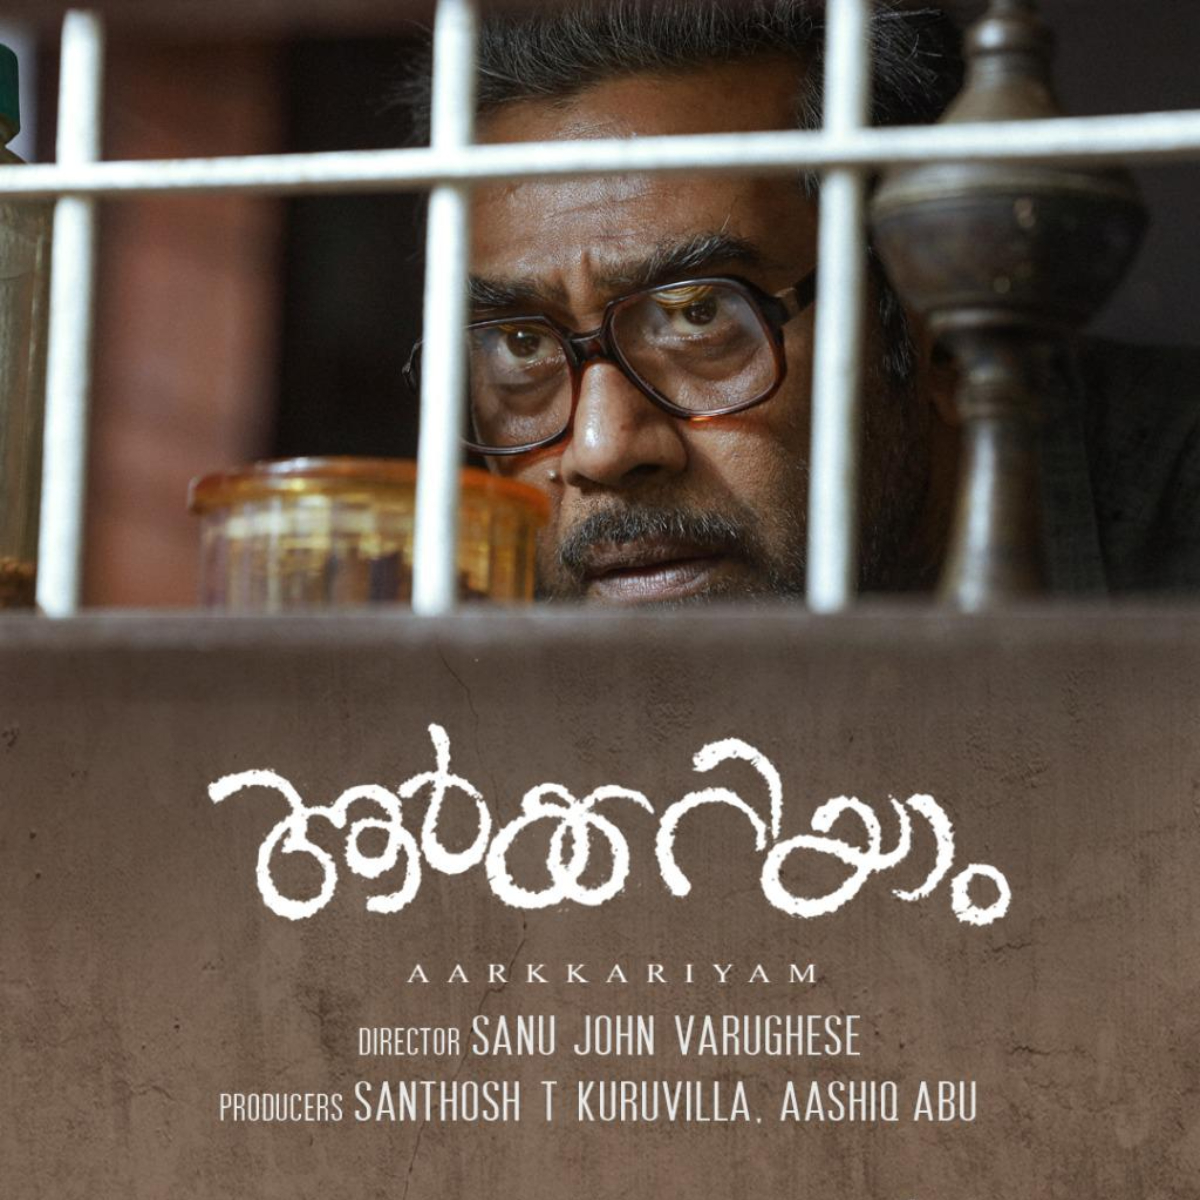 Aarkkariyam Movie Twitter Review: Here's what audience has to say about Parvathy and Biju Menon starrer